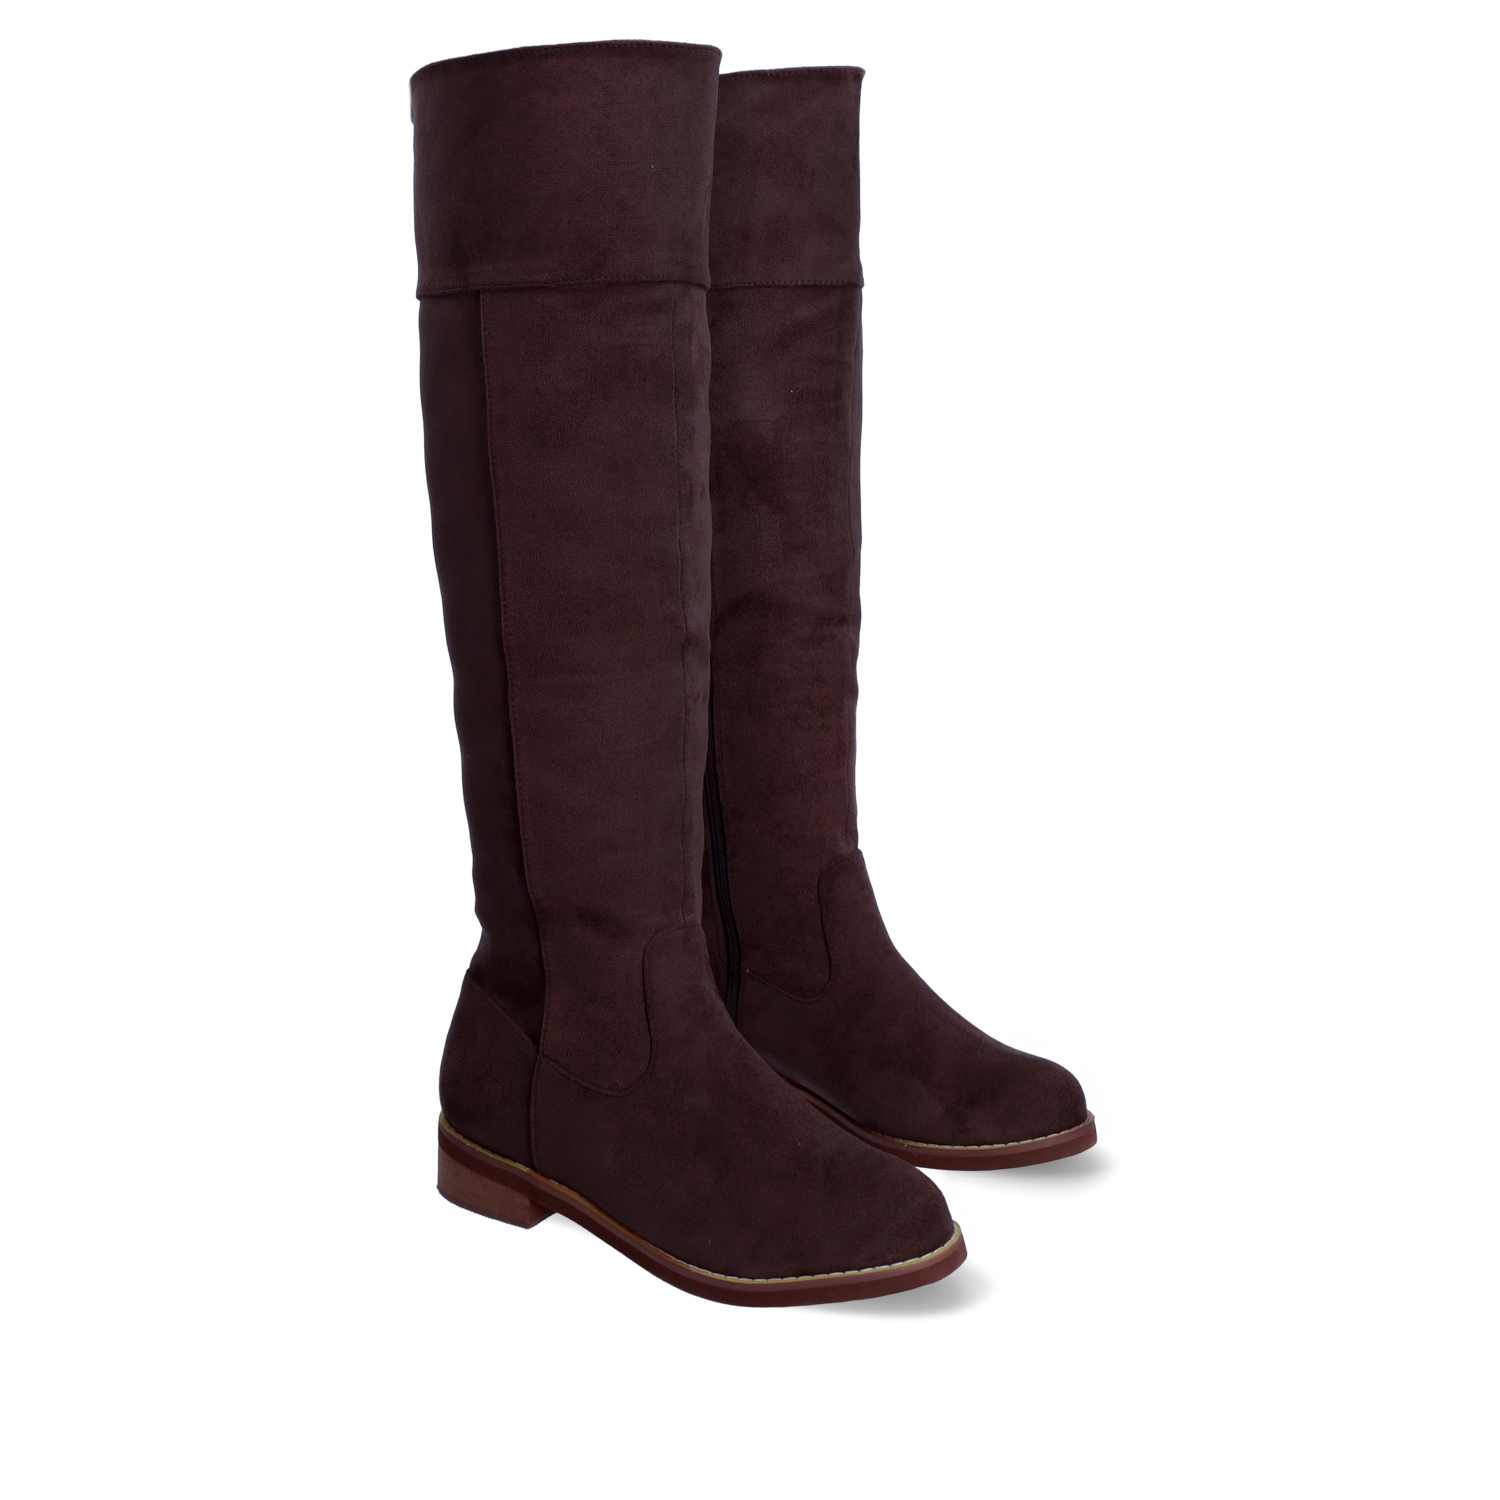 Flat knee-high boots in brown faux suede 